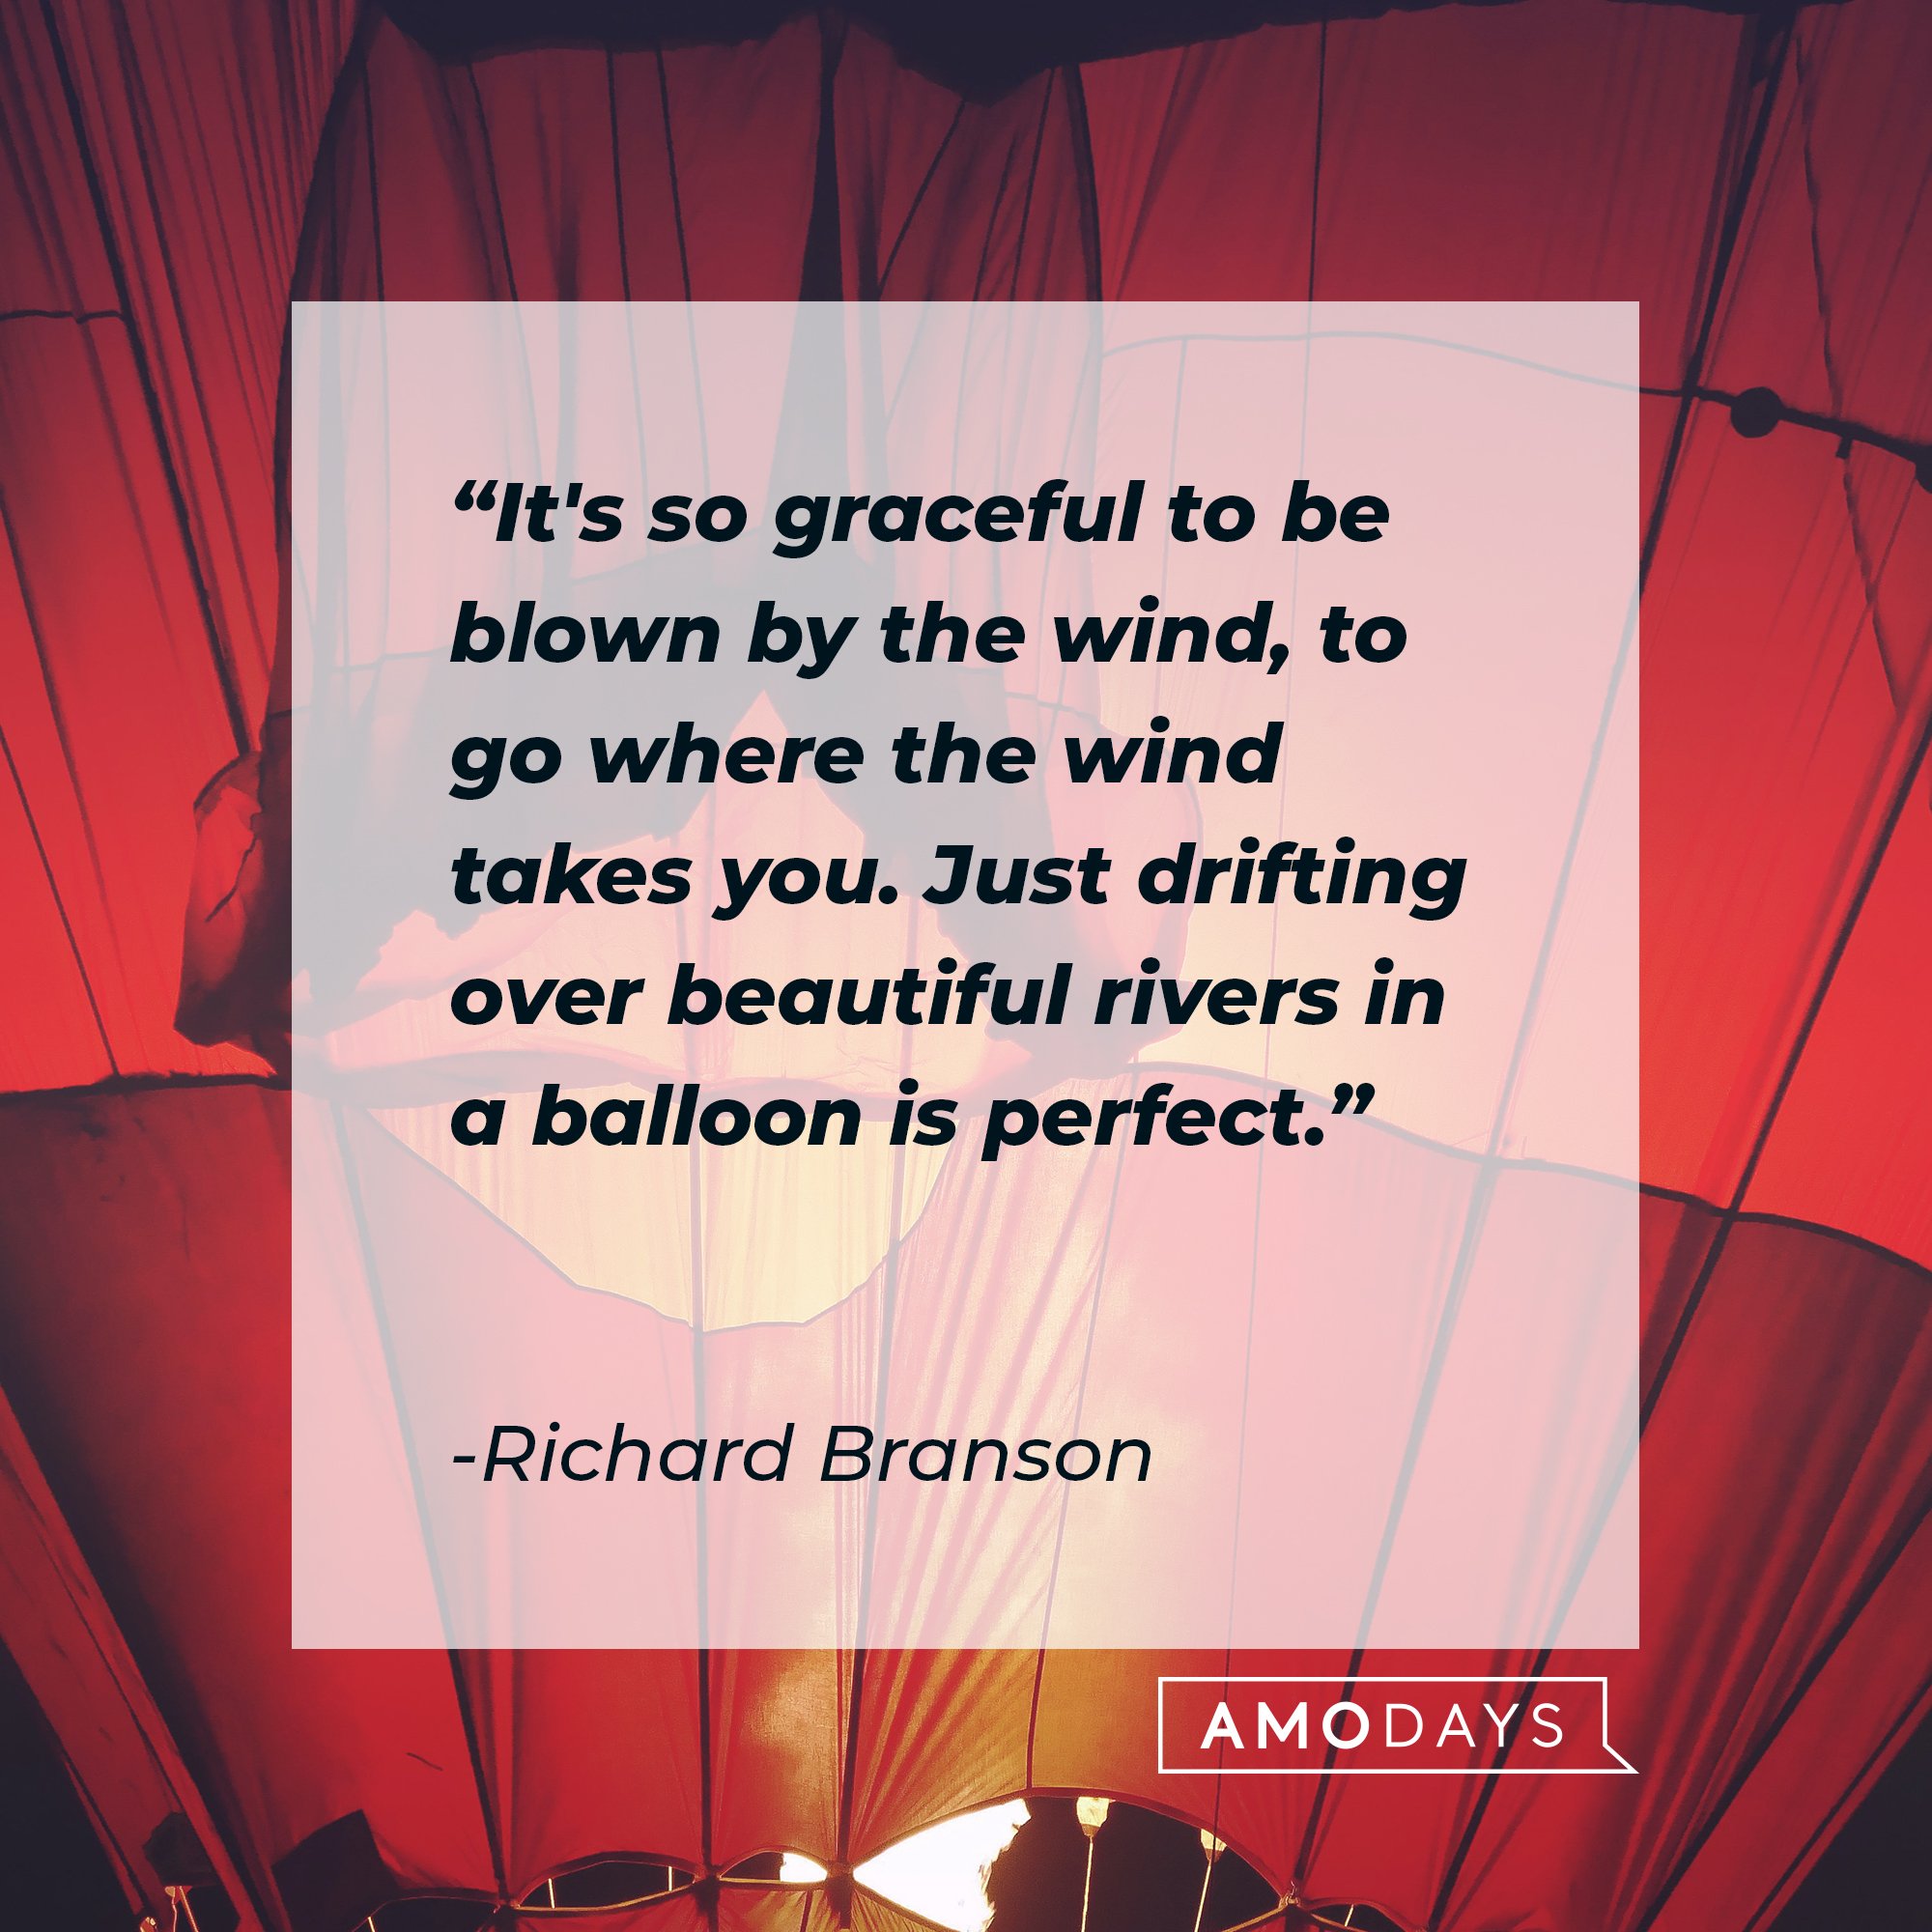  Wald Wassermann’s quote: "Please hold my hand, for every balloon needs a string to stay grounded." | Image: AmoDays 